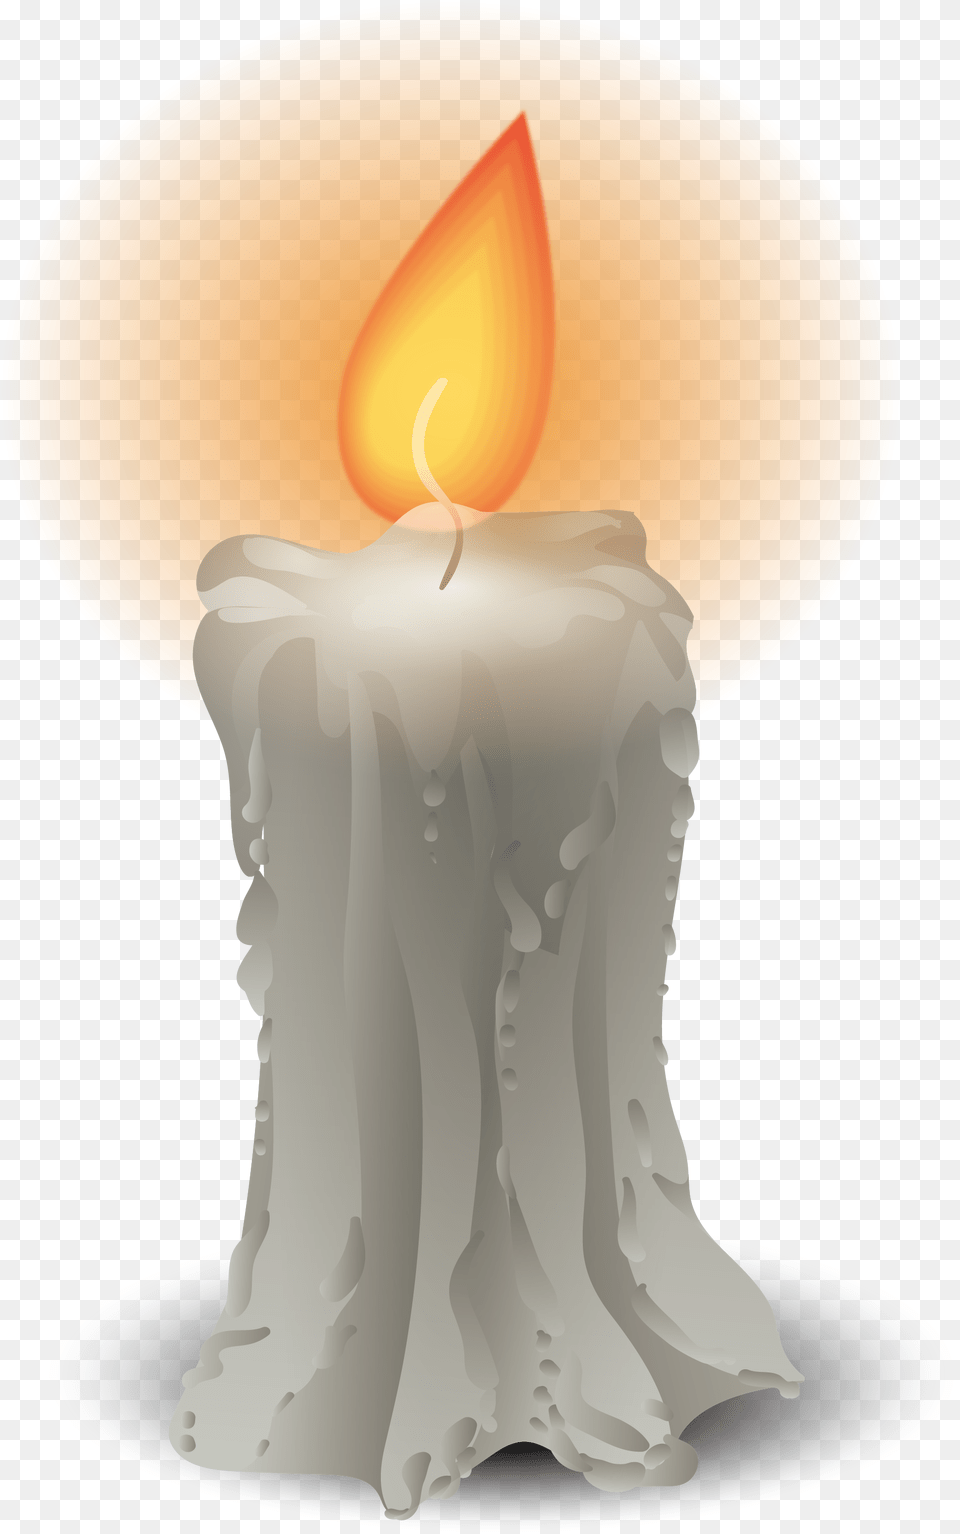 Candle Combustion Wax Burning Candle, Fire, Flame Free Png